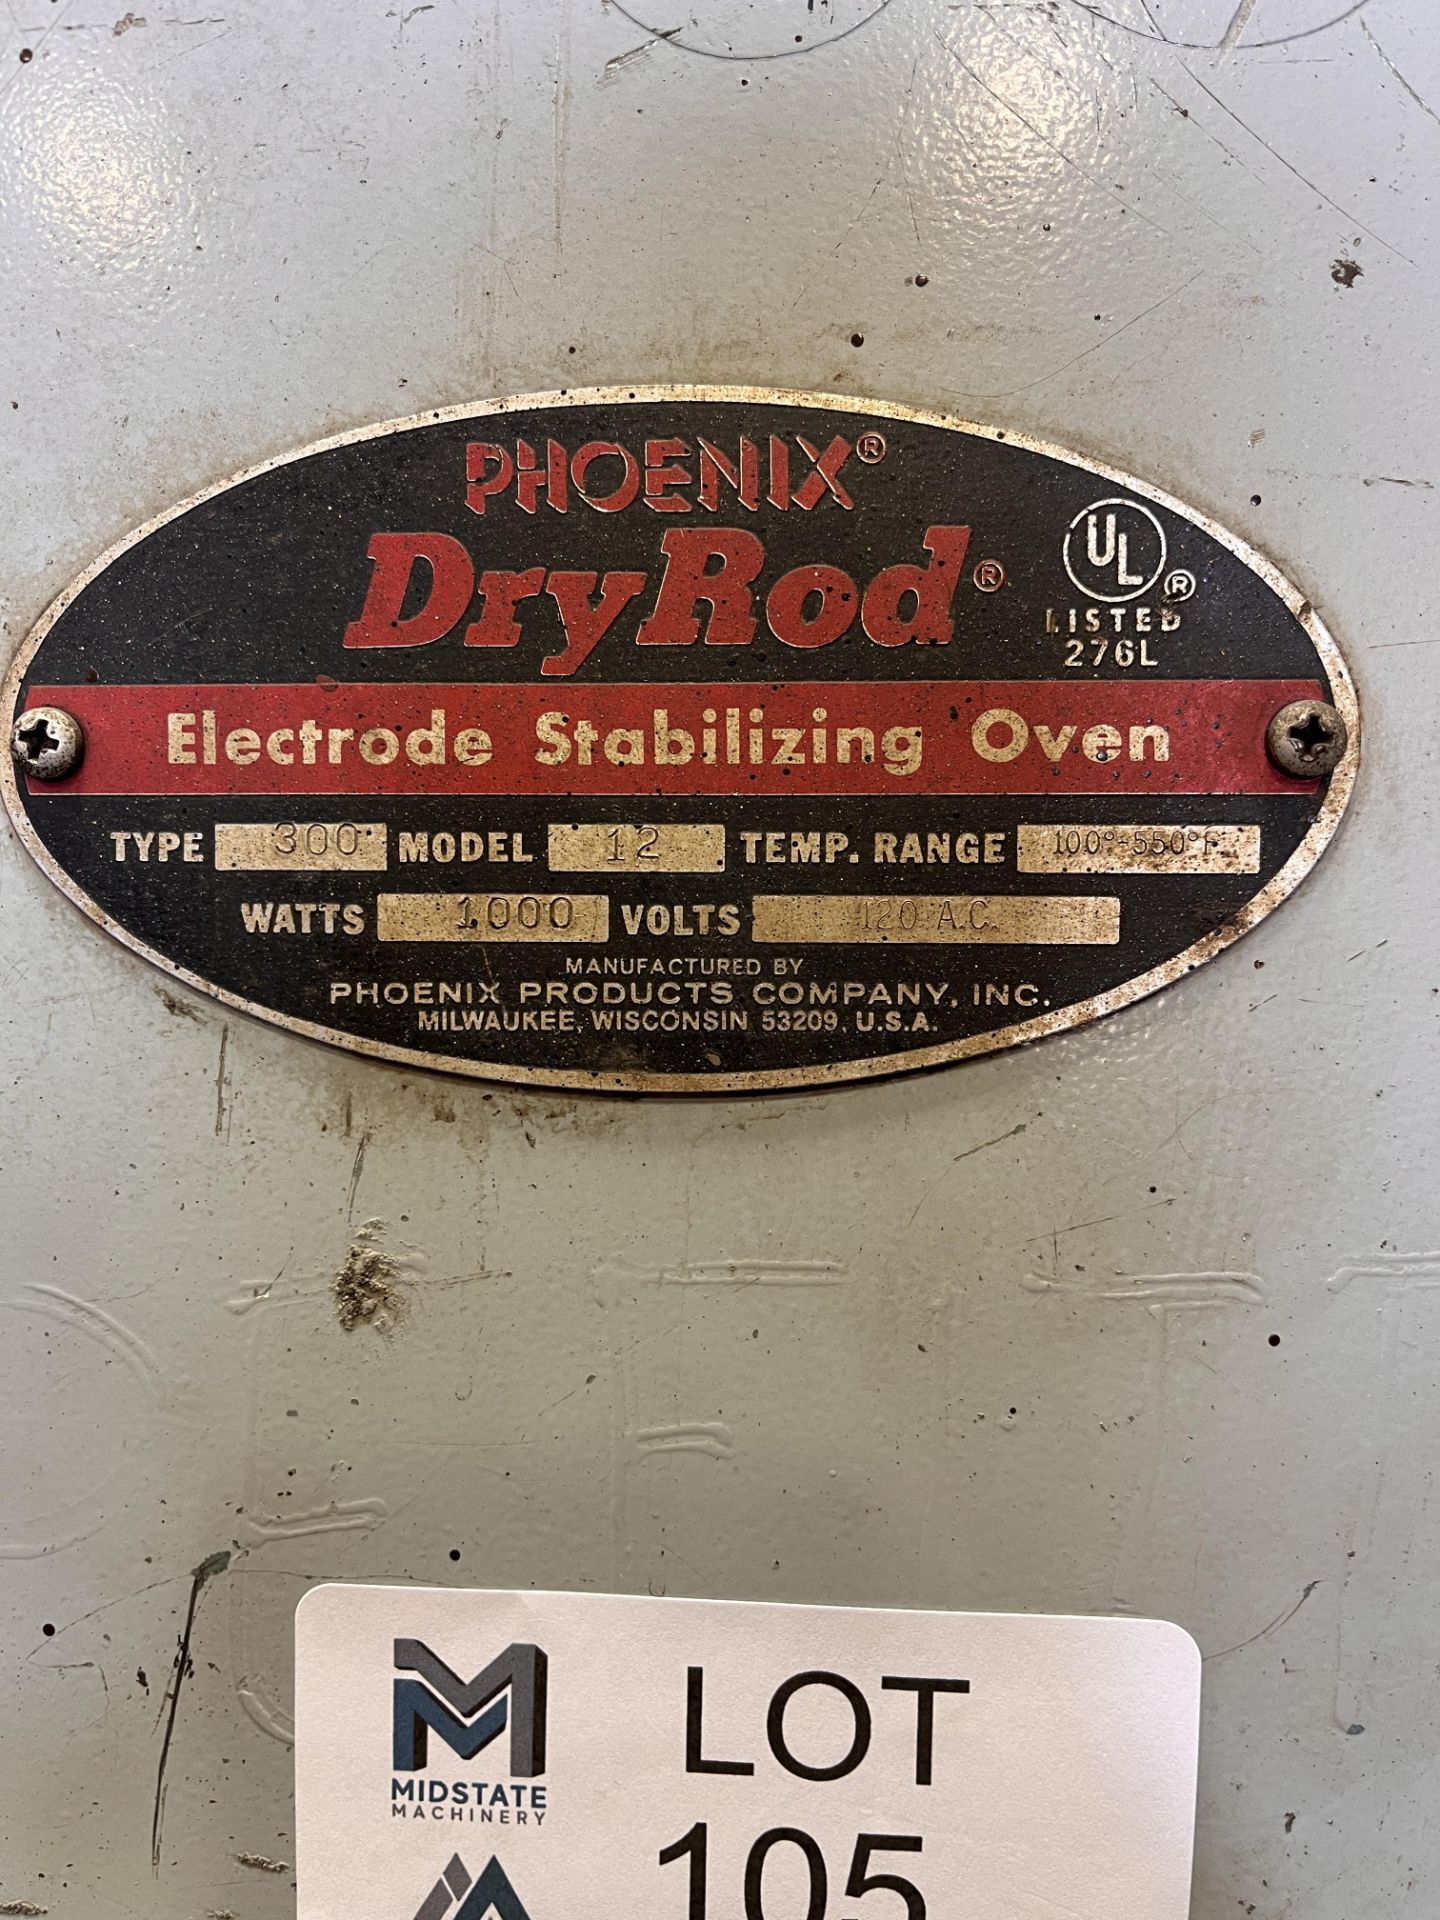 Phoenix DryRod Electric Stabilizing Oven - Image 2 of 3